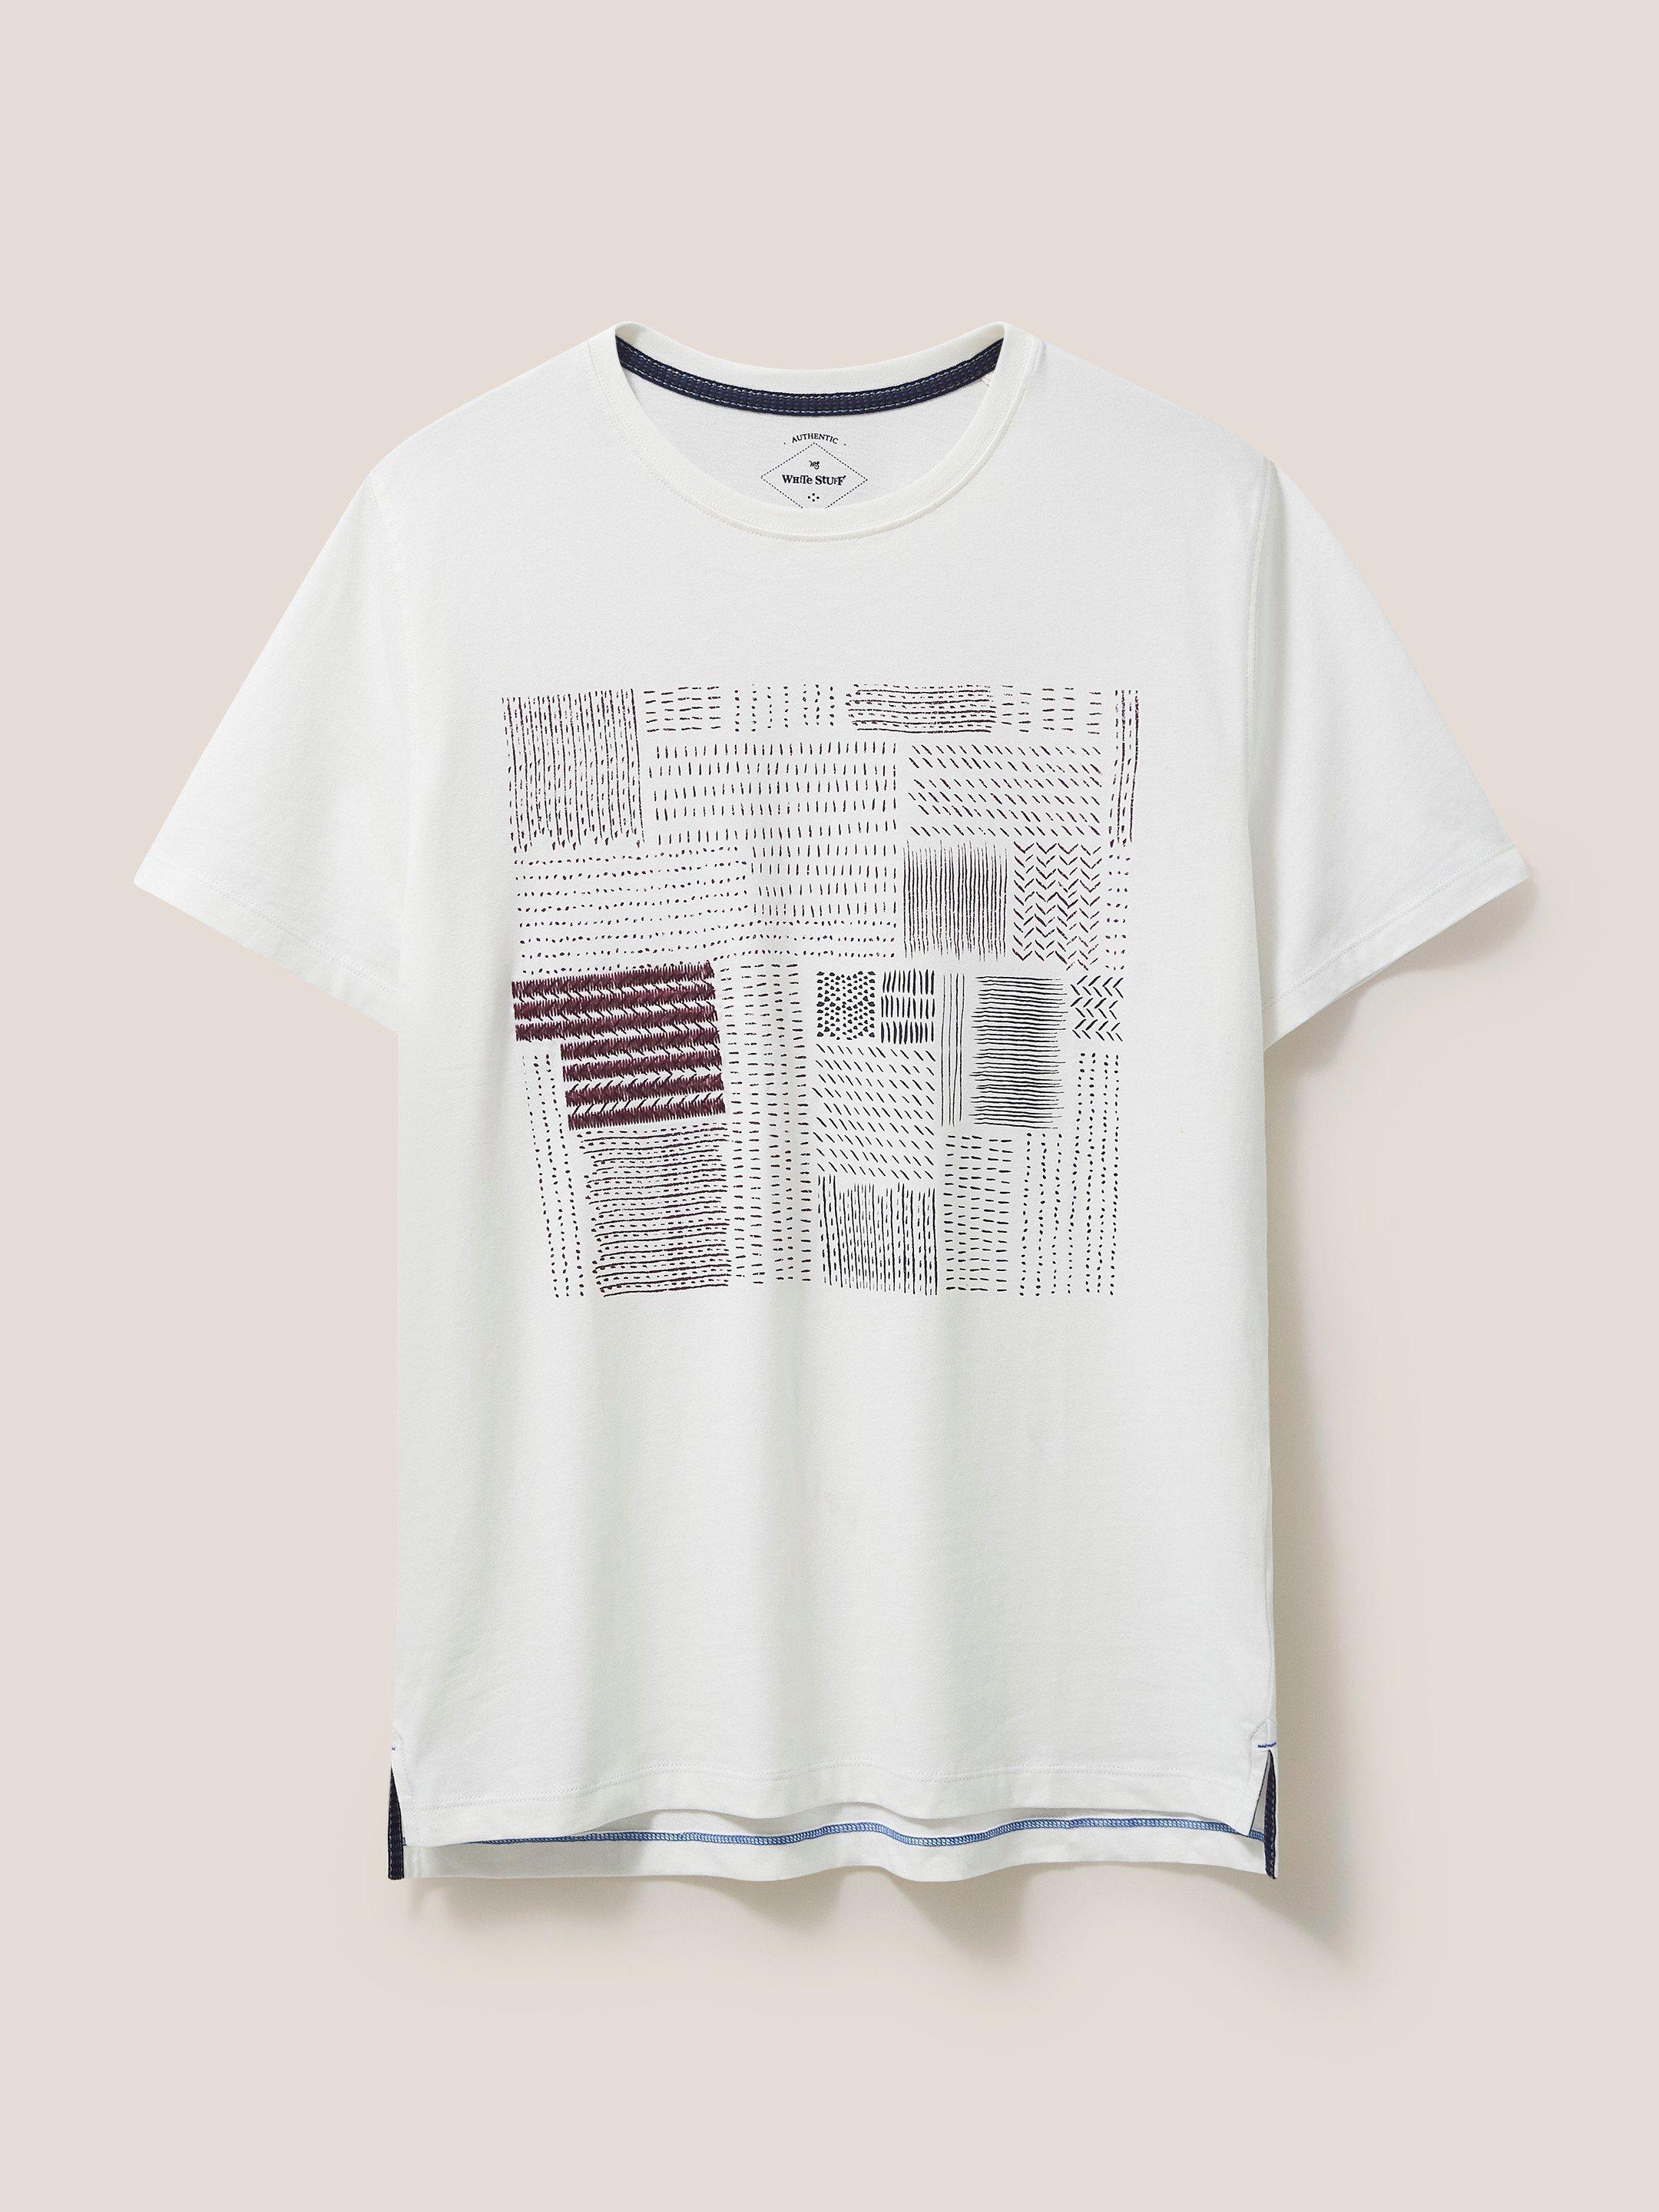 Patchwork Graphic Tshirt in NAT WHITE - FLAT FRONT